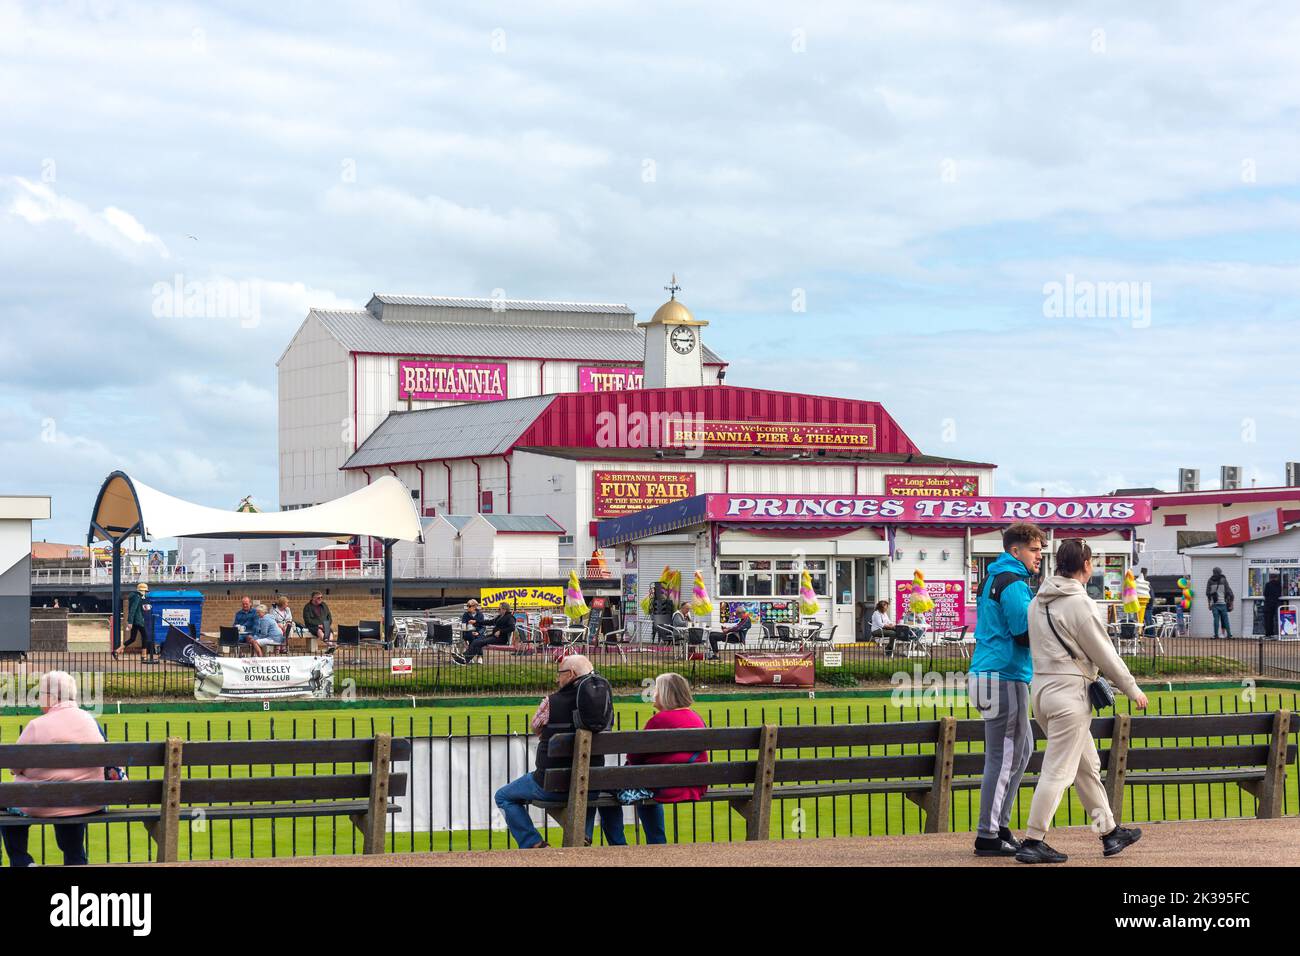 Brittania Pier et Bowling Green, Marine Parade, Great Yarmouth, Norfolk, Angleterre, Royaume-Uni Banque D'Images